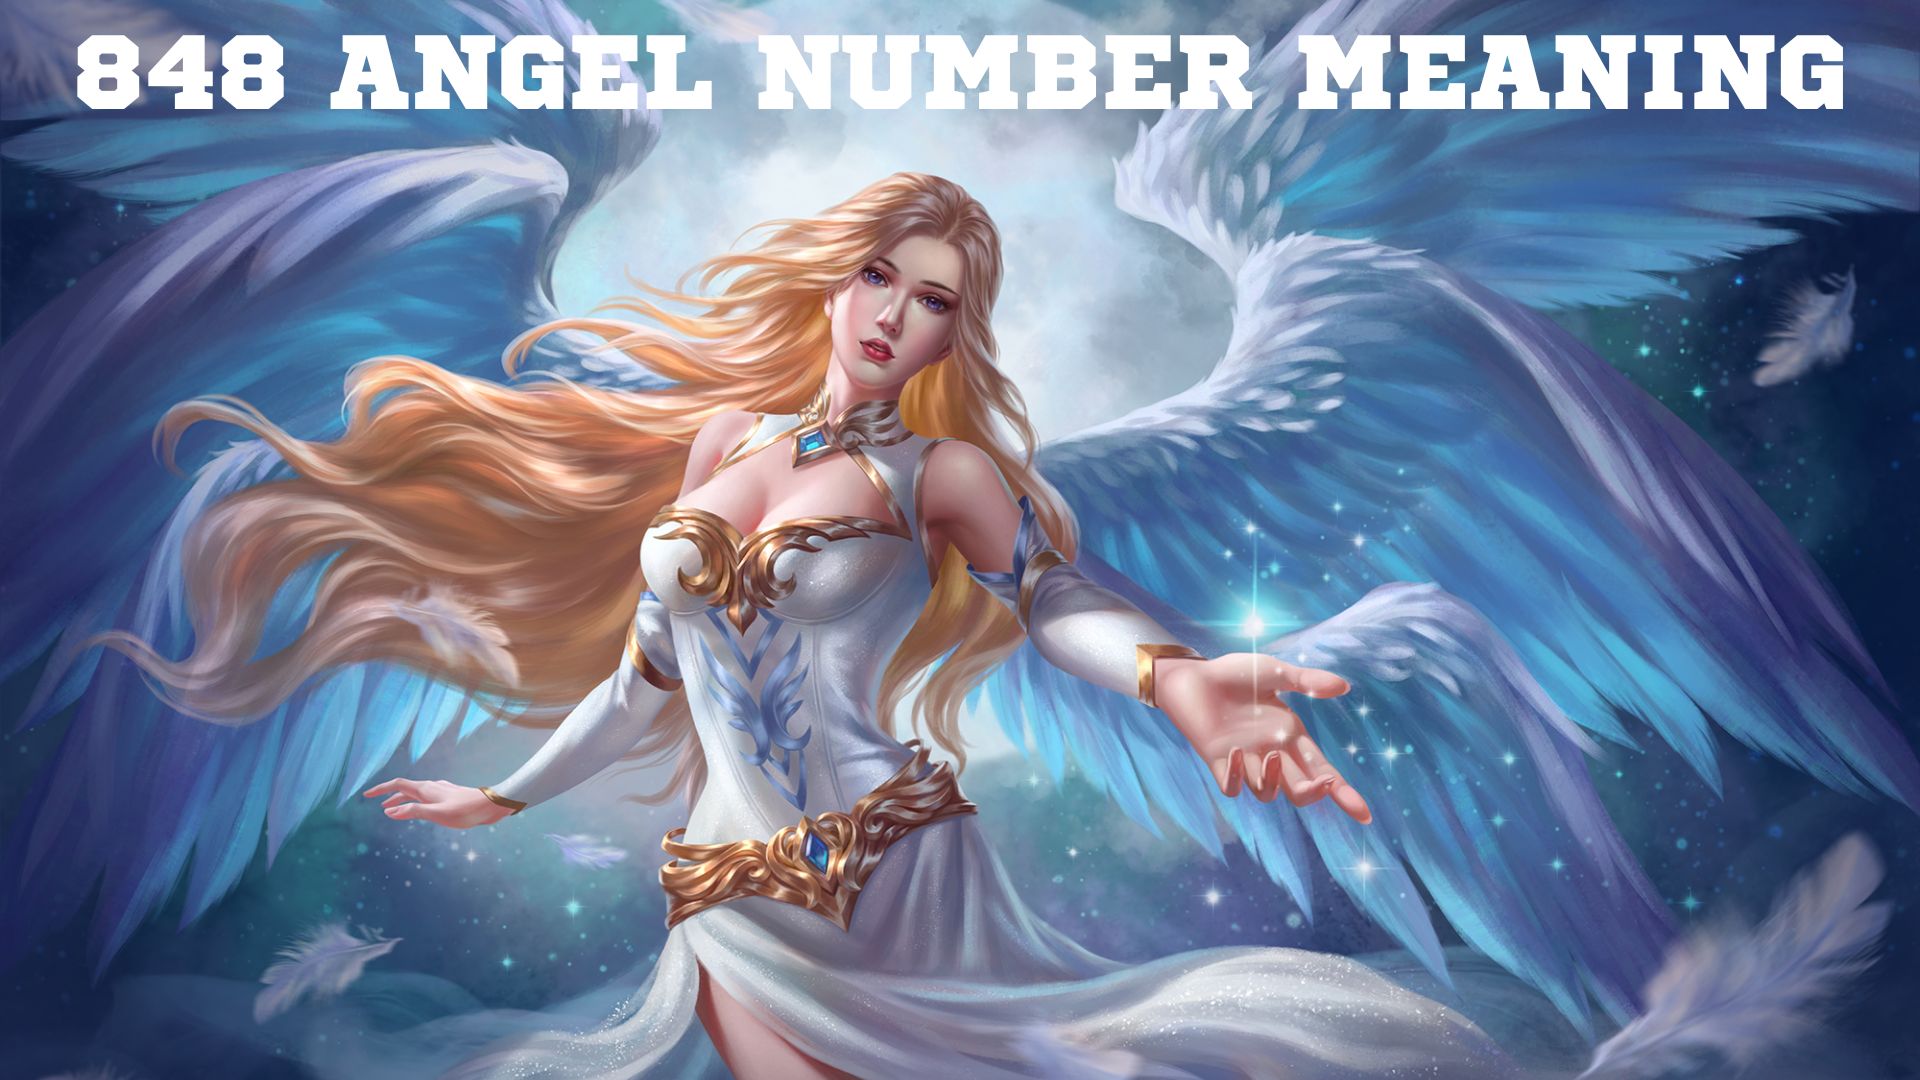 848 Angel Number Meaning - Symbol Of Wealth, Prosperity, And Success